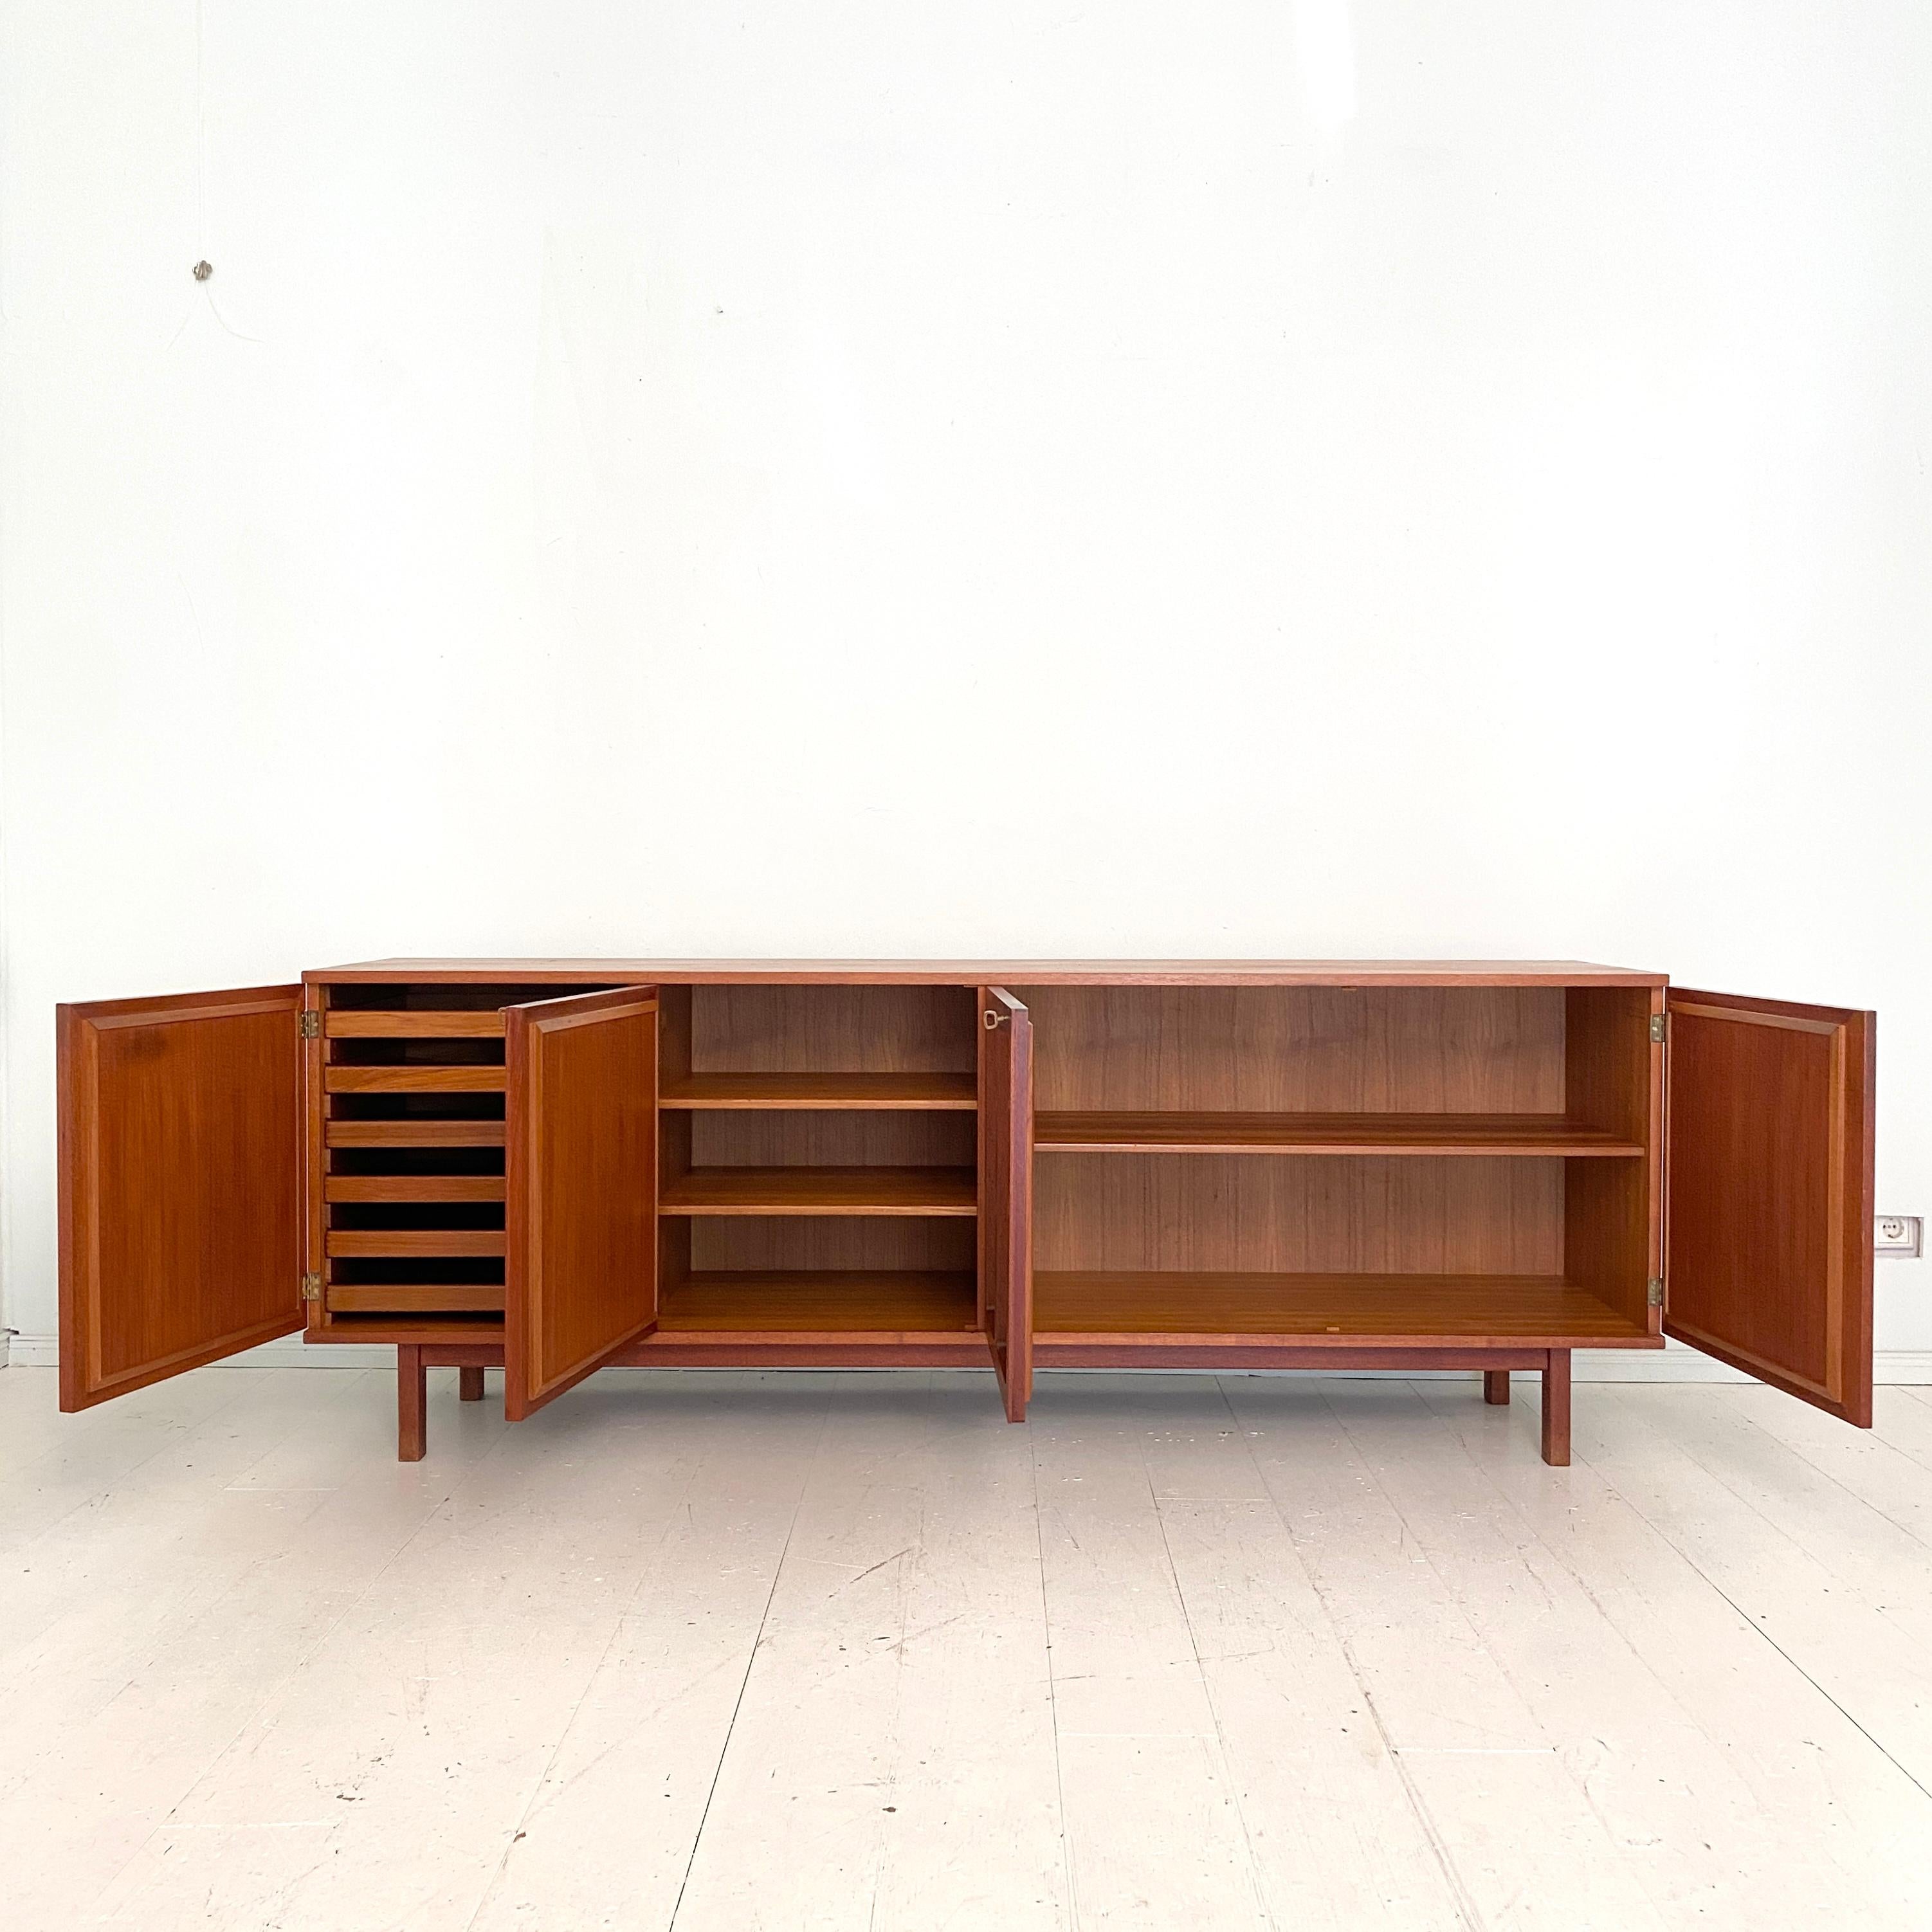 This beautiful mid century teak sideboard by Karl-Erik Ekselius for JOC was made 1964.
It is marked and signed, also done by the 19th March 1964.
The sideboard has got our doors and one is hiding 6 tablet drawers. It is made from fantastic quality